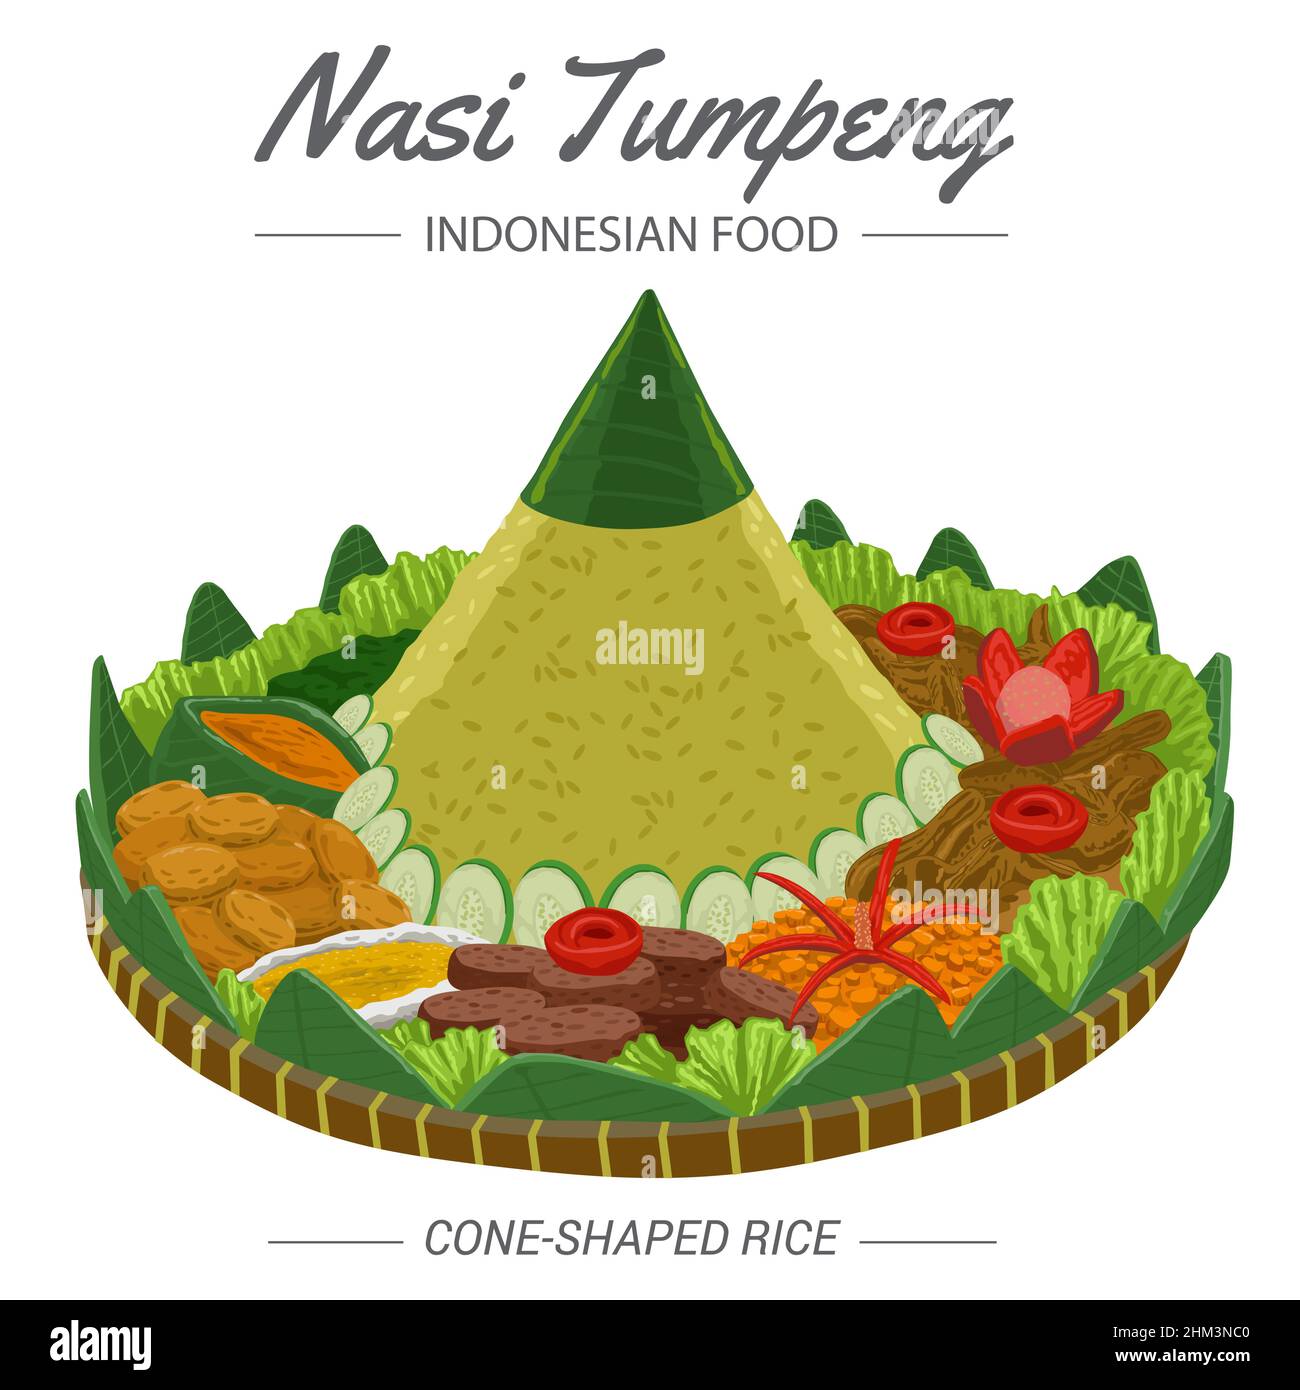 Nasi Tumpeng is cone-shaped rice with side dishes and garnishes around it from Indonesia. Stock Vector